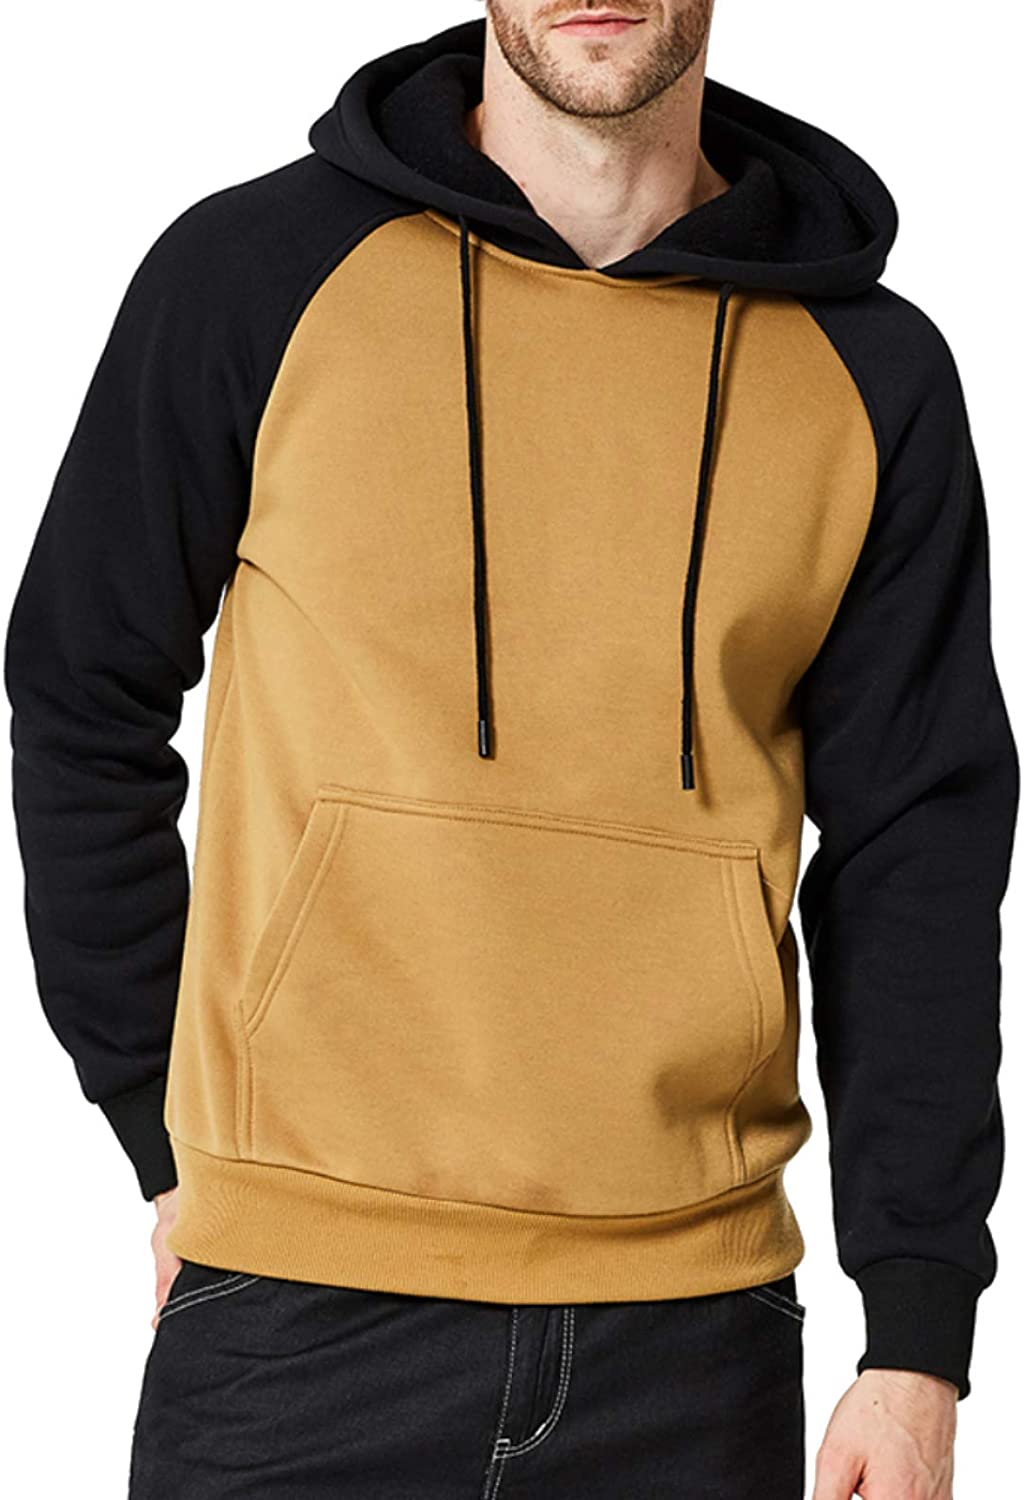 Men's Hoodies Contrast Color Pullover with Pockets Casual Loose Sweatshirt Long Sleeve Comfy Sport Outwear